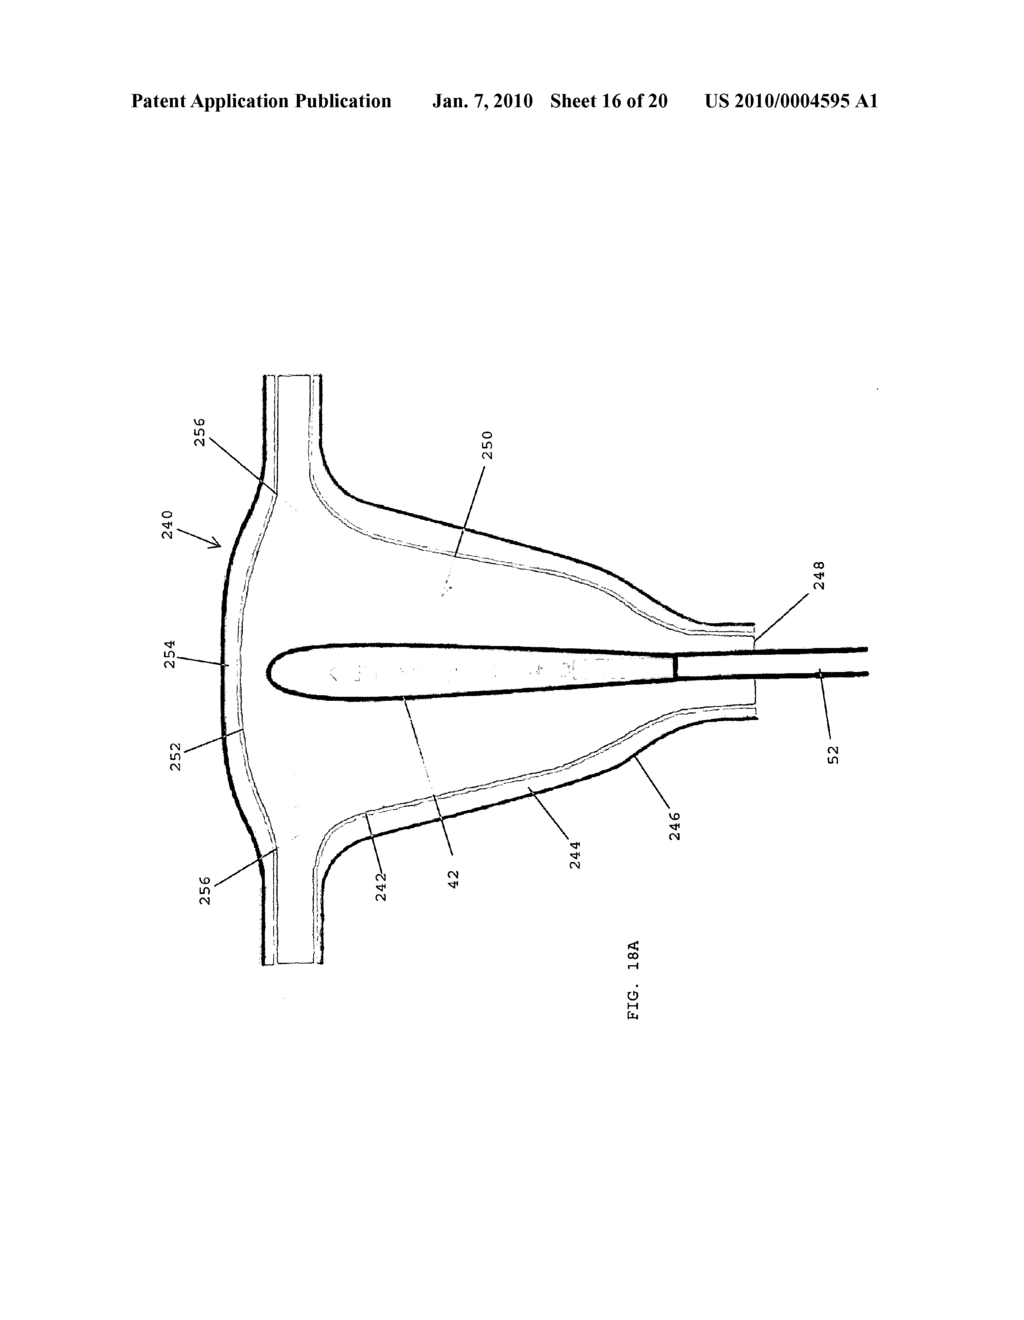 BALLOON CATHETER SYSTEMS FOR TREATING UTERINE DISORDERS HAVING FLUID LINE DE-GASSING ASSEMBLIES AND METHODS THEREFOR - diagram, schematic, and image 17